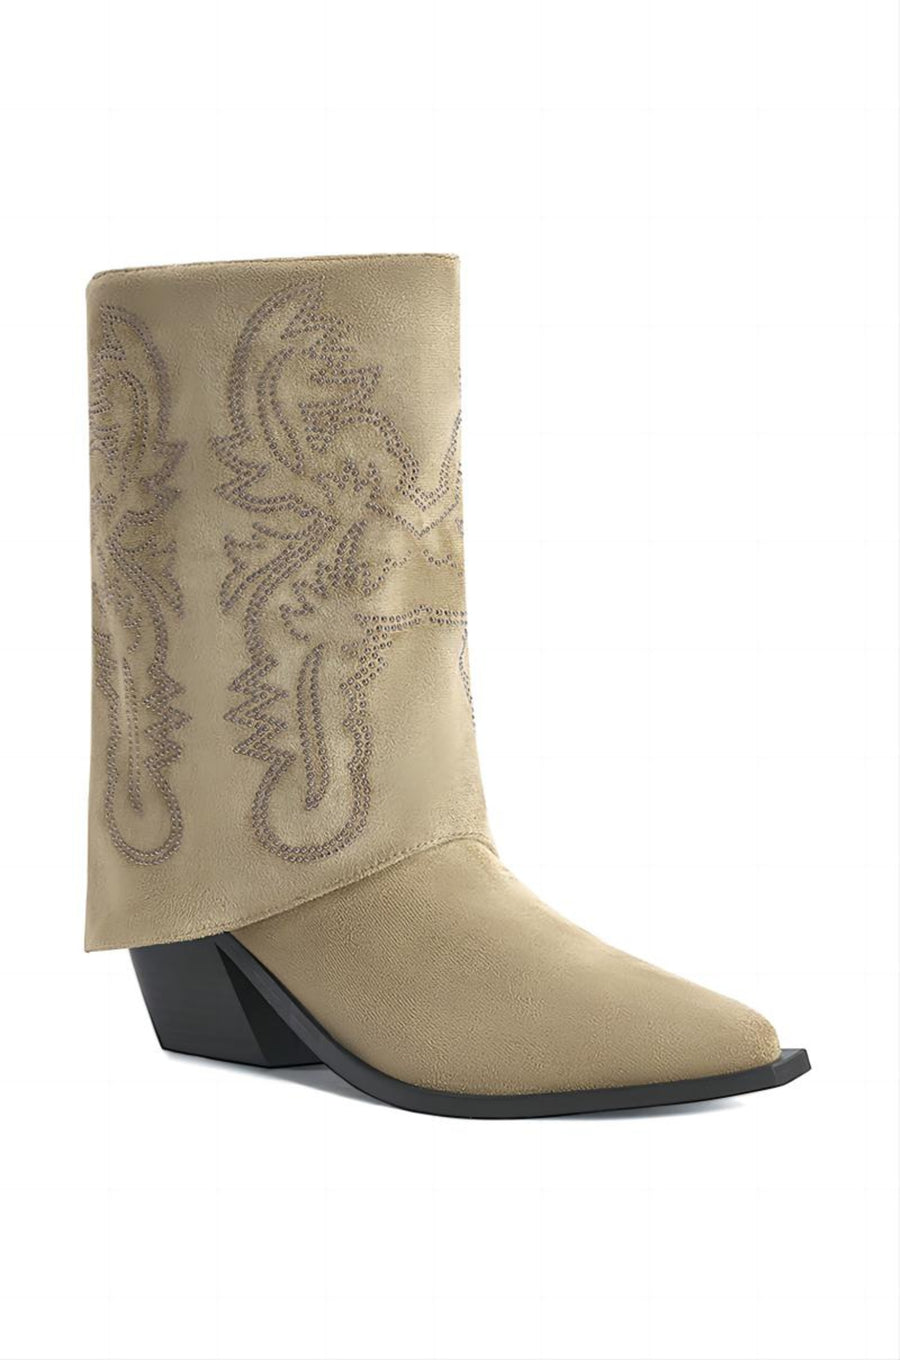 angled view of beige suede western inspired cowboy boots with a fold over accent and a classic cowboy boot design on the shaft 